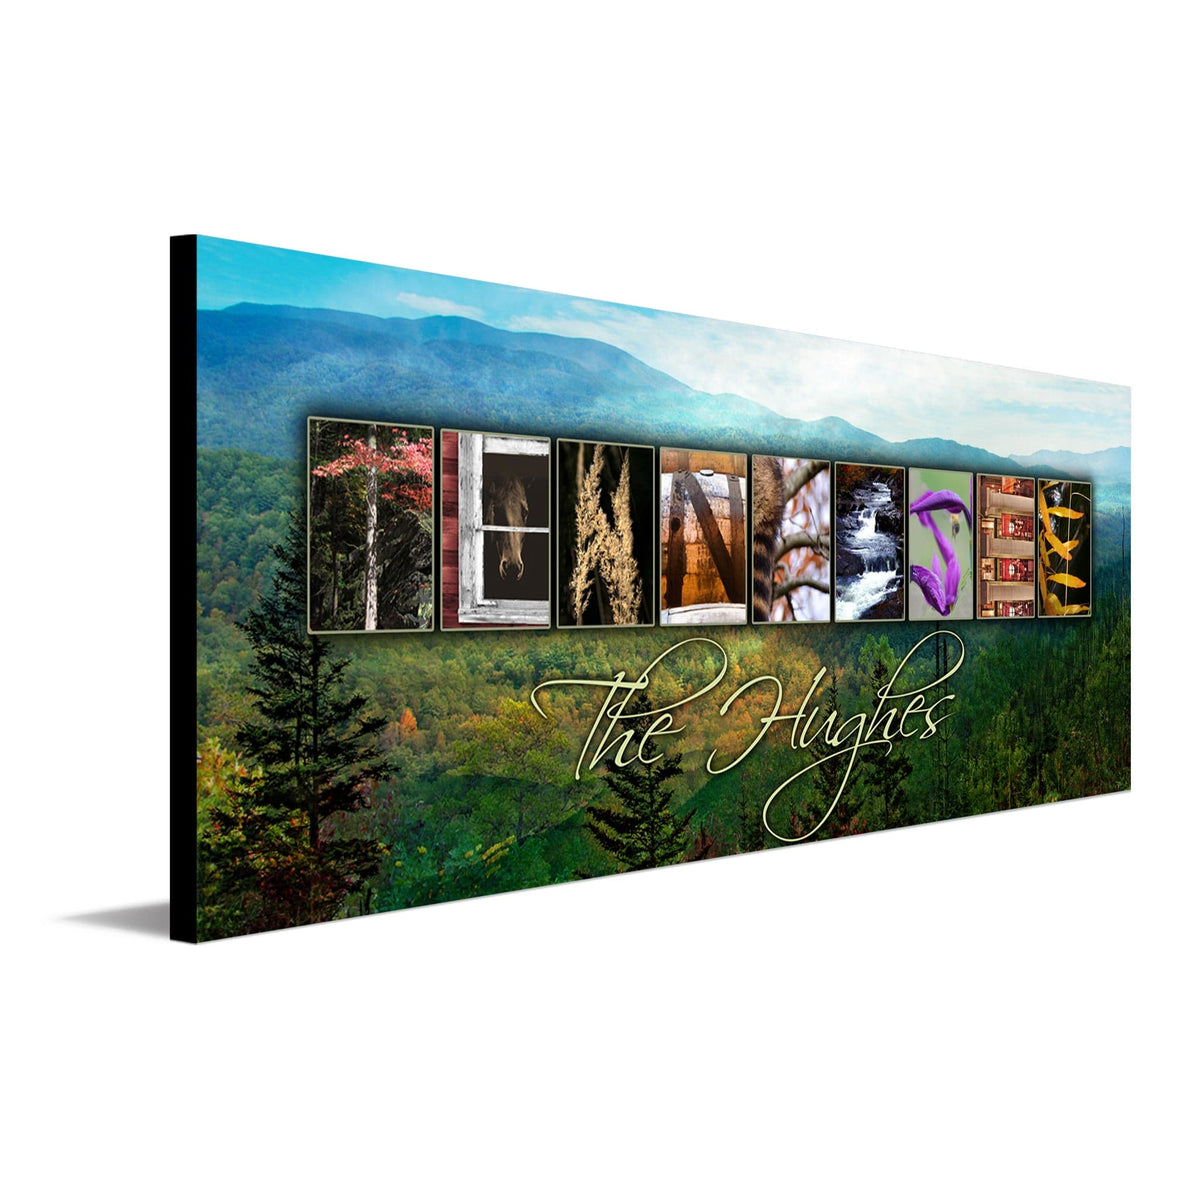 Personalized Tennessee wall art using images from the state to spell the word Tennessee - Personal-Prints